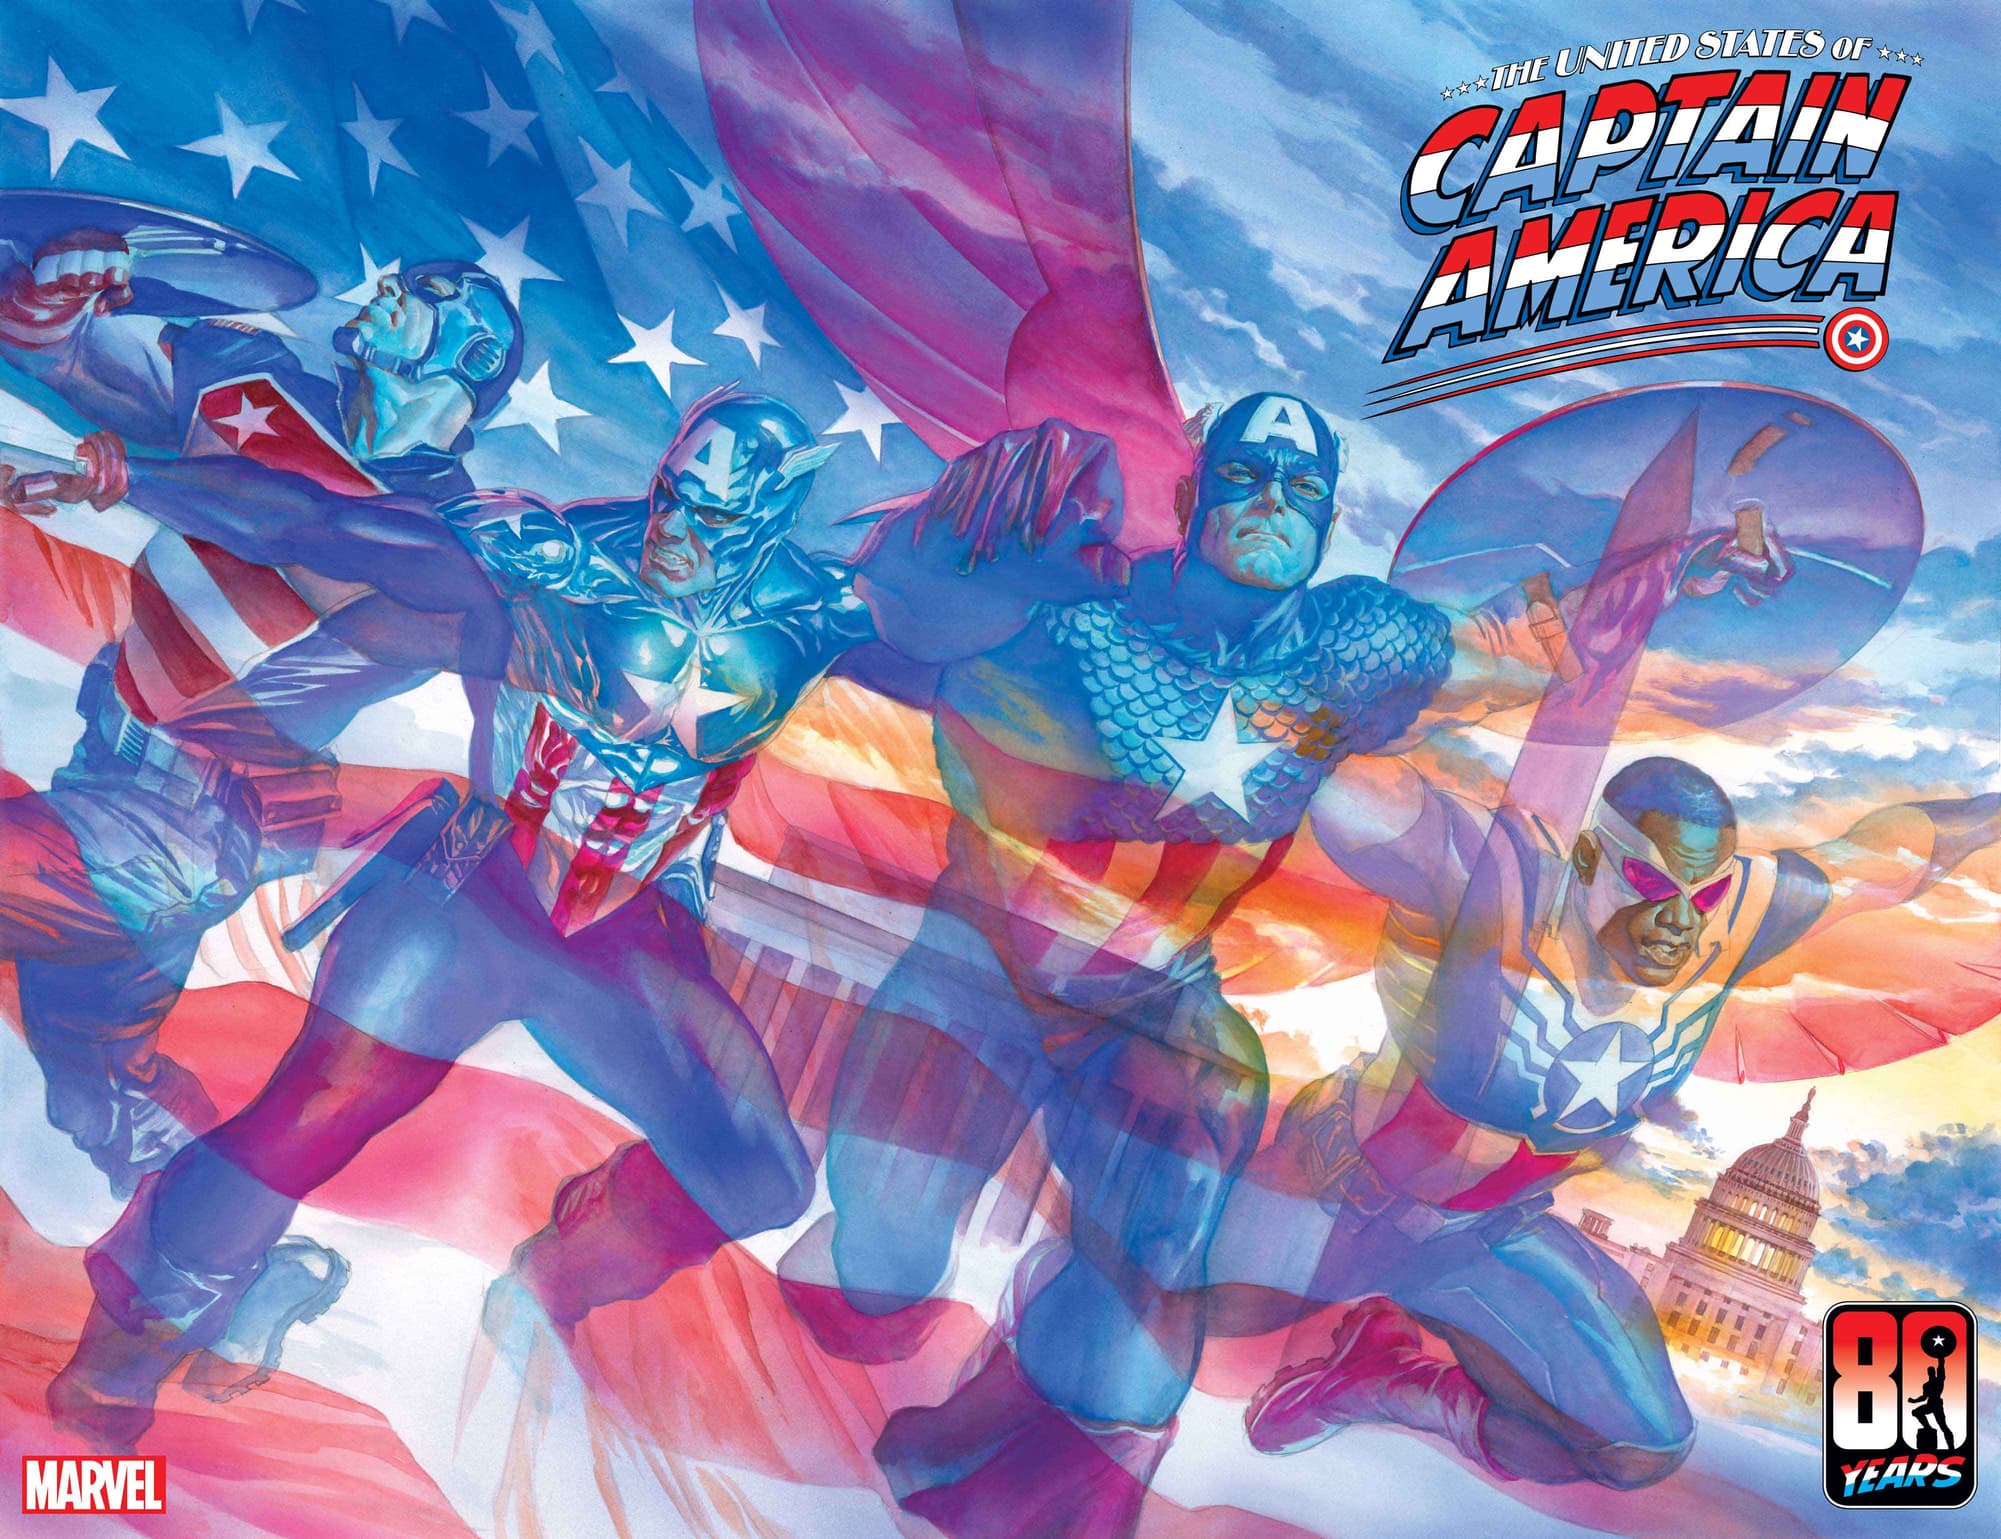 THE UNITED STATES OF CAPTAIN AMERICA (2021) #1 Cover by Alex Ross